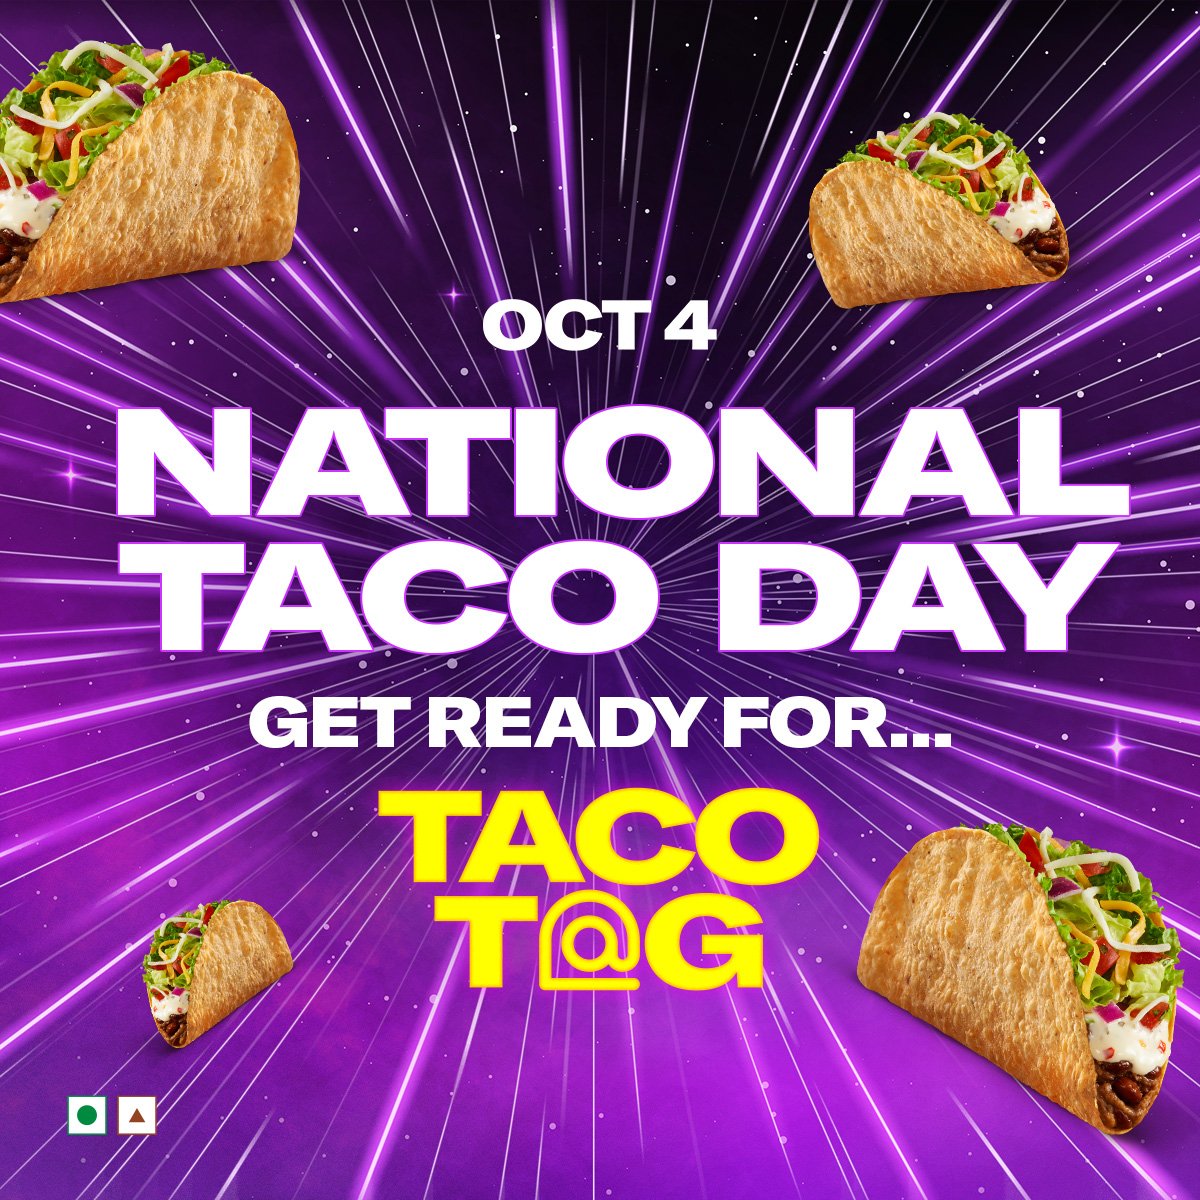 TACO BELL® INDIA CELEBRATES NATIONAL TACO DAY WITH WORLD’S BIGGEST GAME